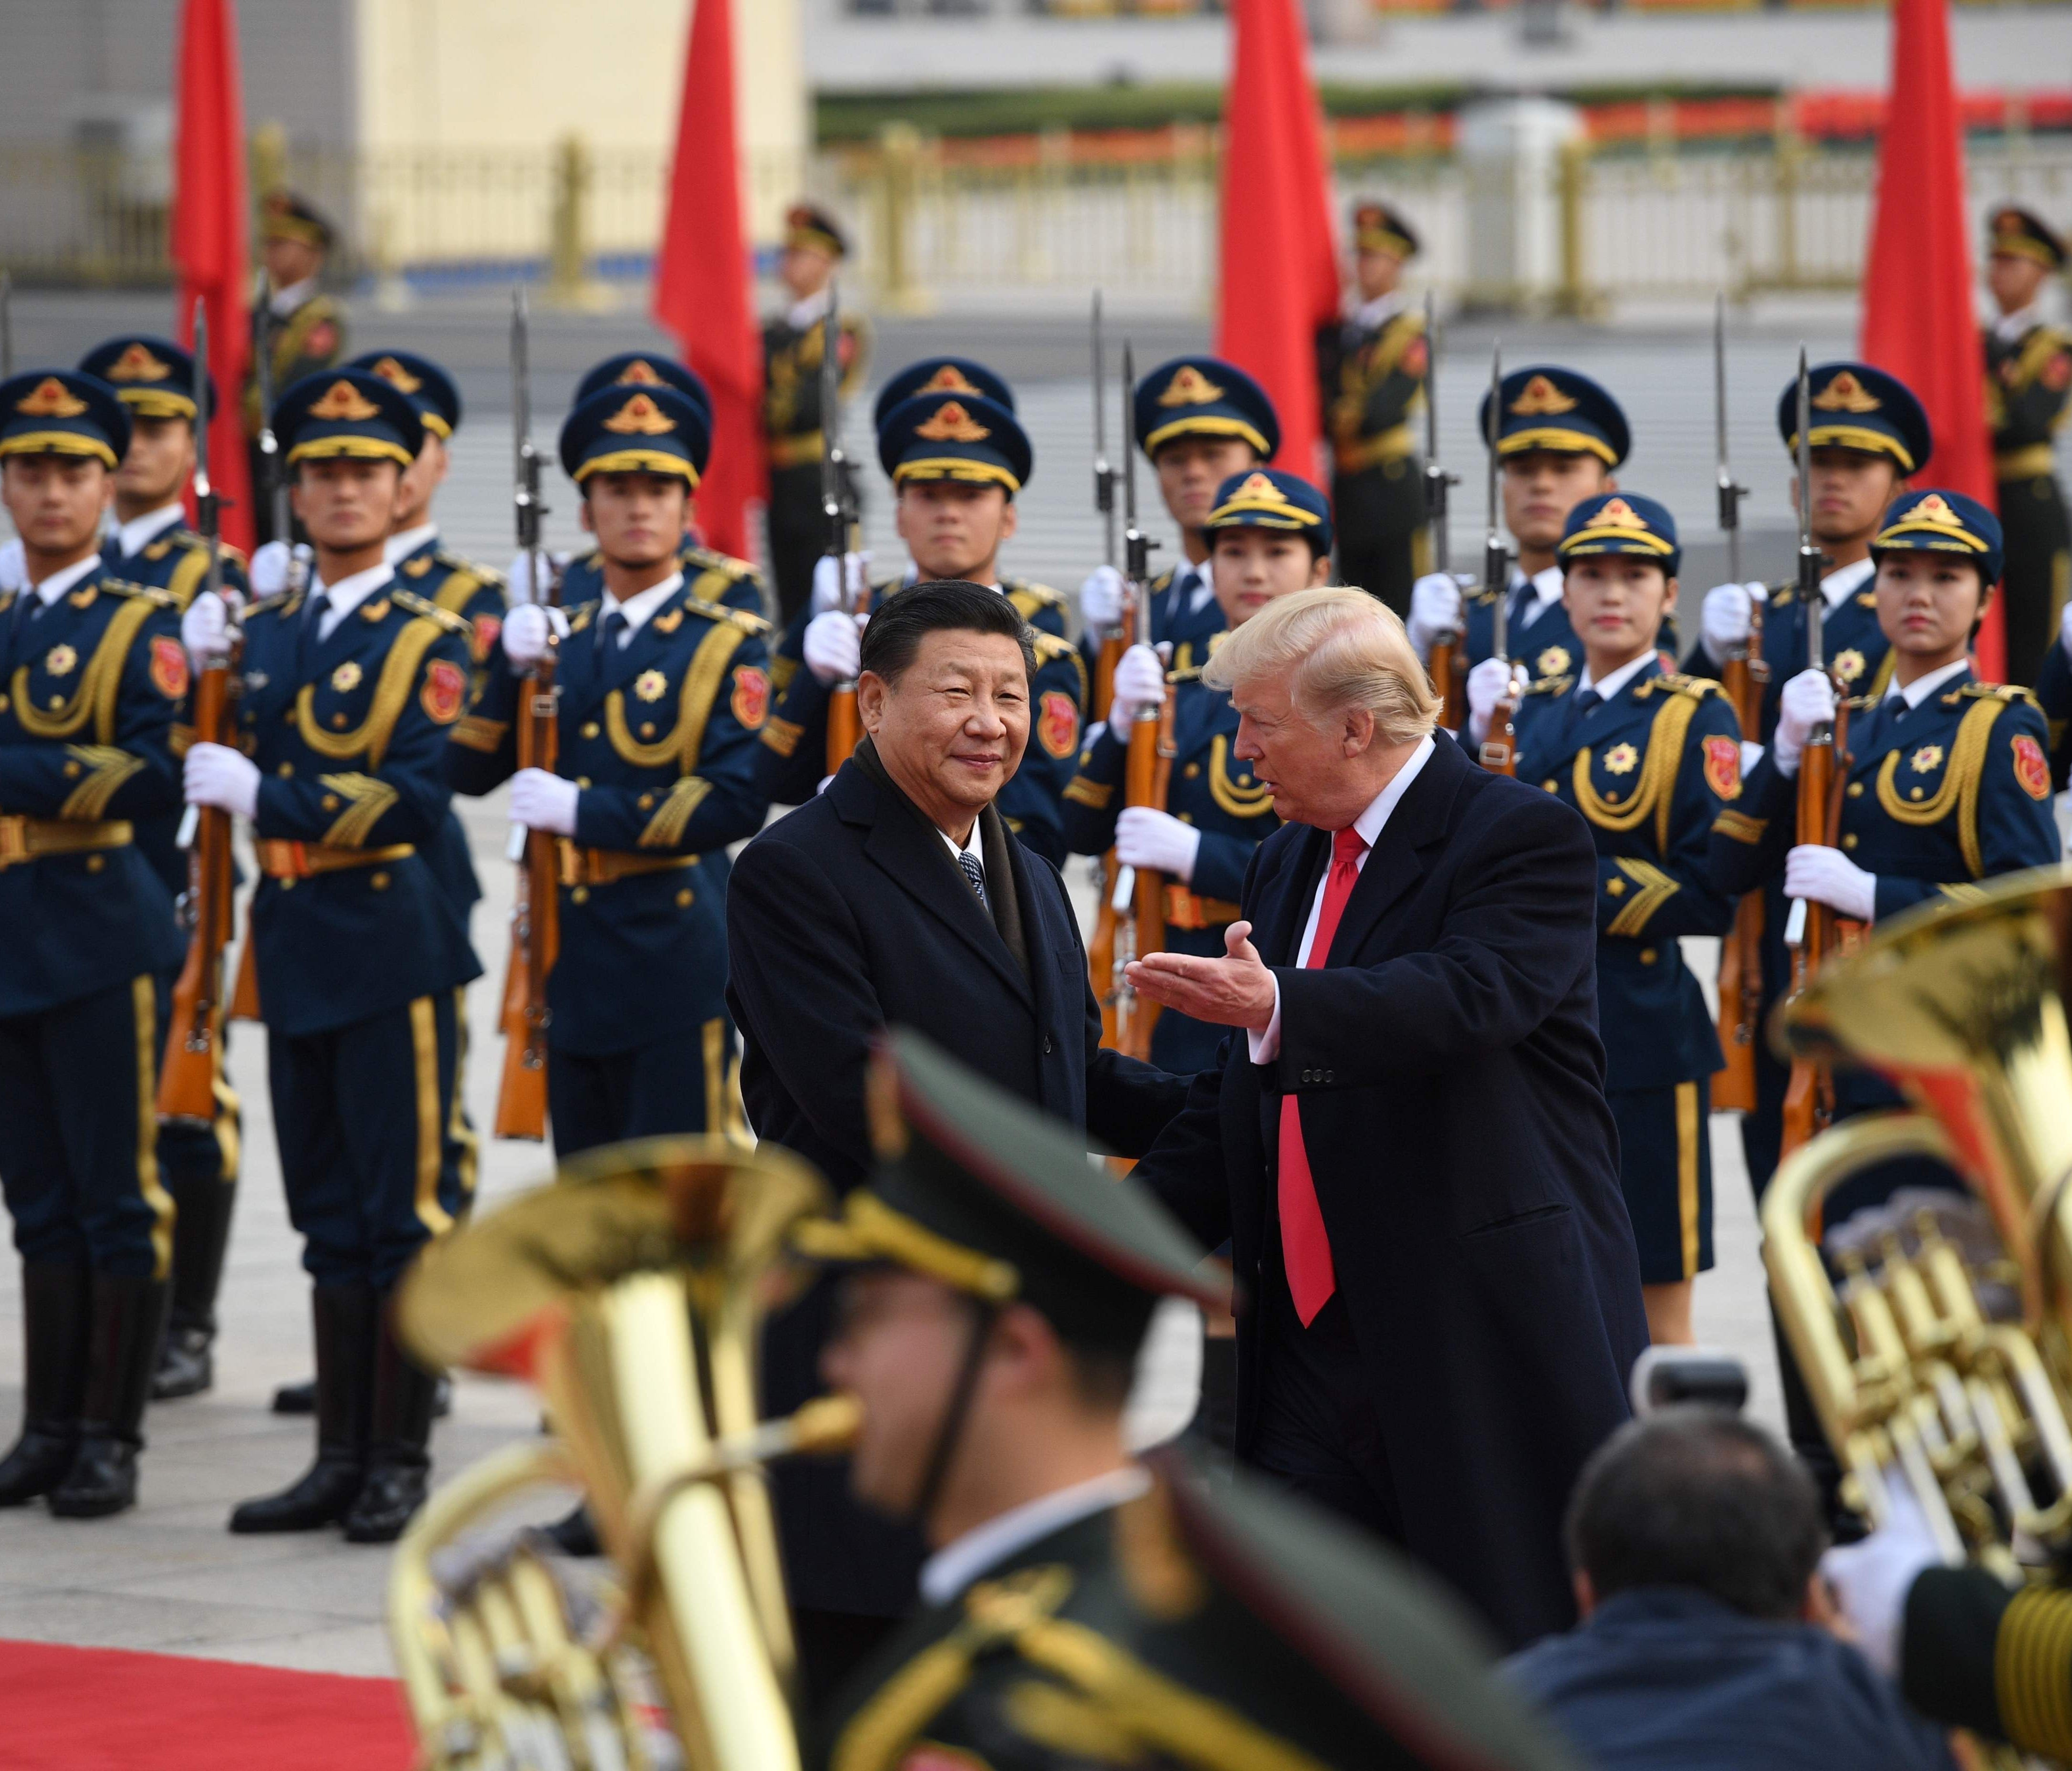 Presidents Trump and Xi Jinping at welcoming ceremony in China.